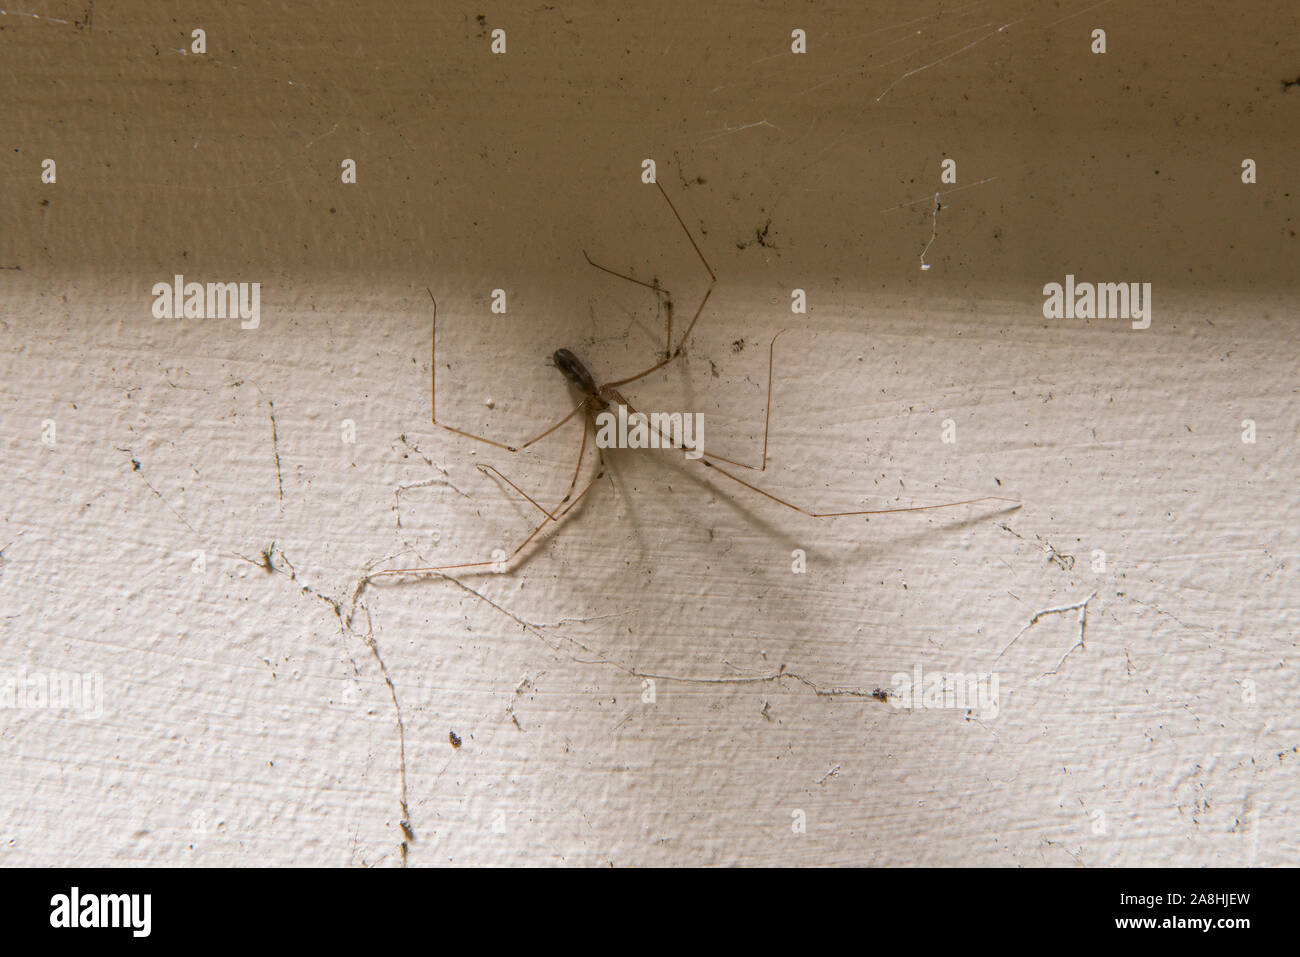 Cellar Spider Pholcus phalangioides. Image taken in the derelict Standish Hospital Stock Photo